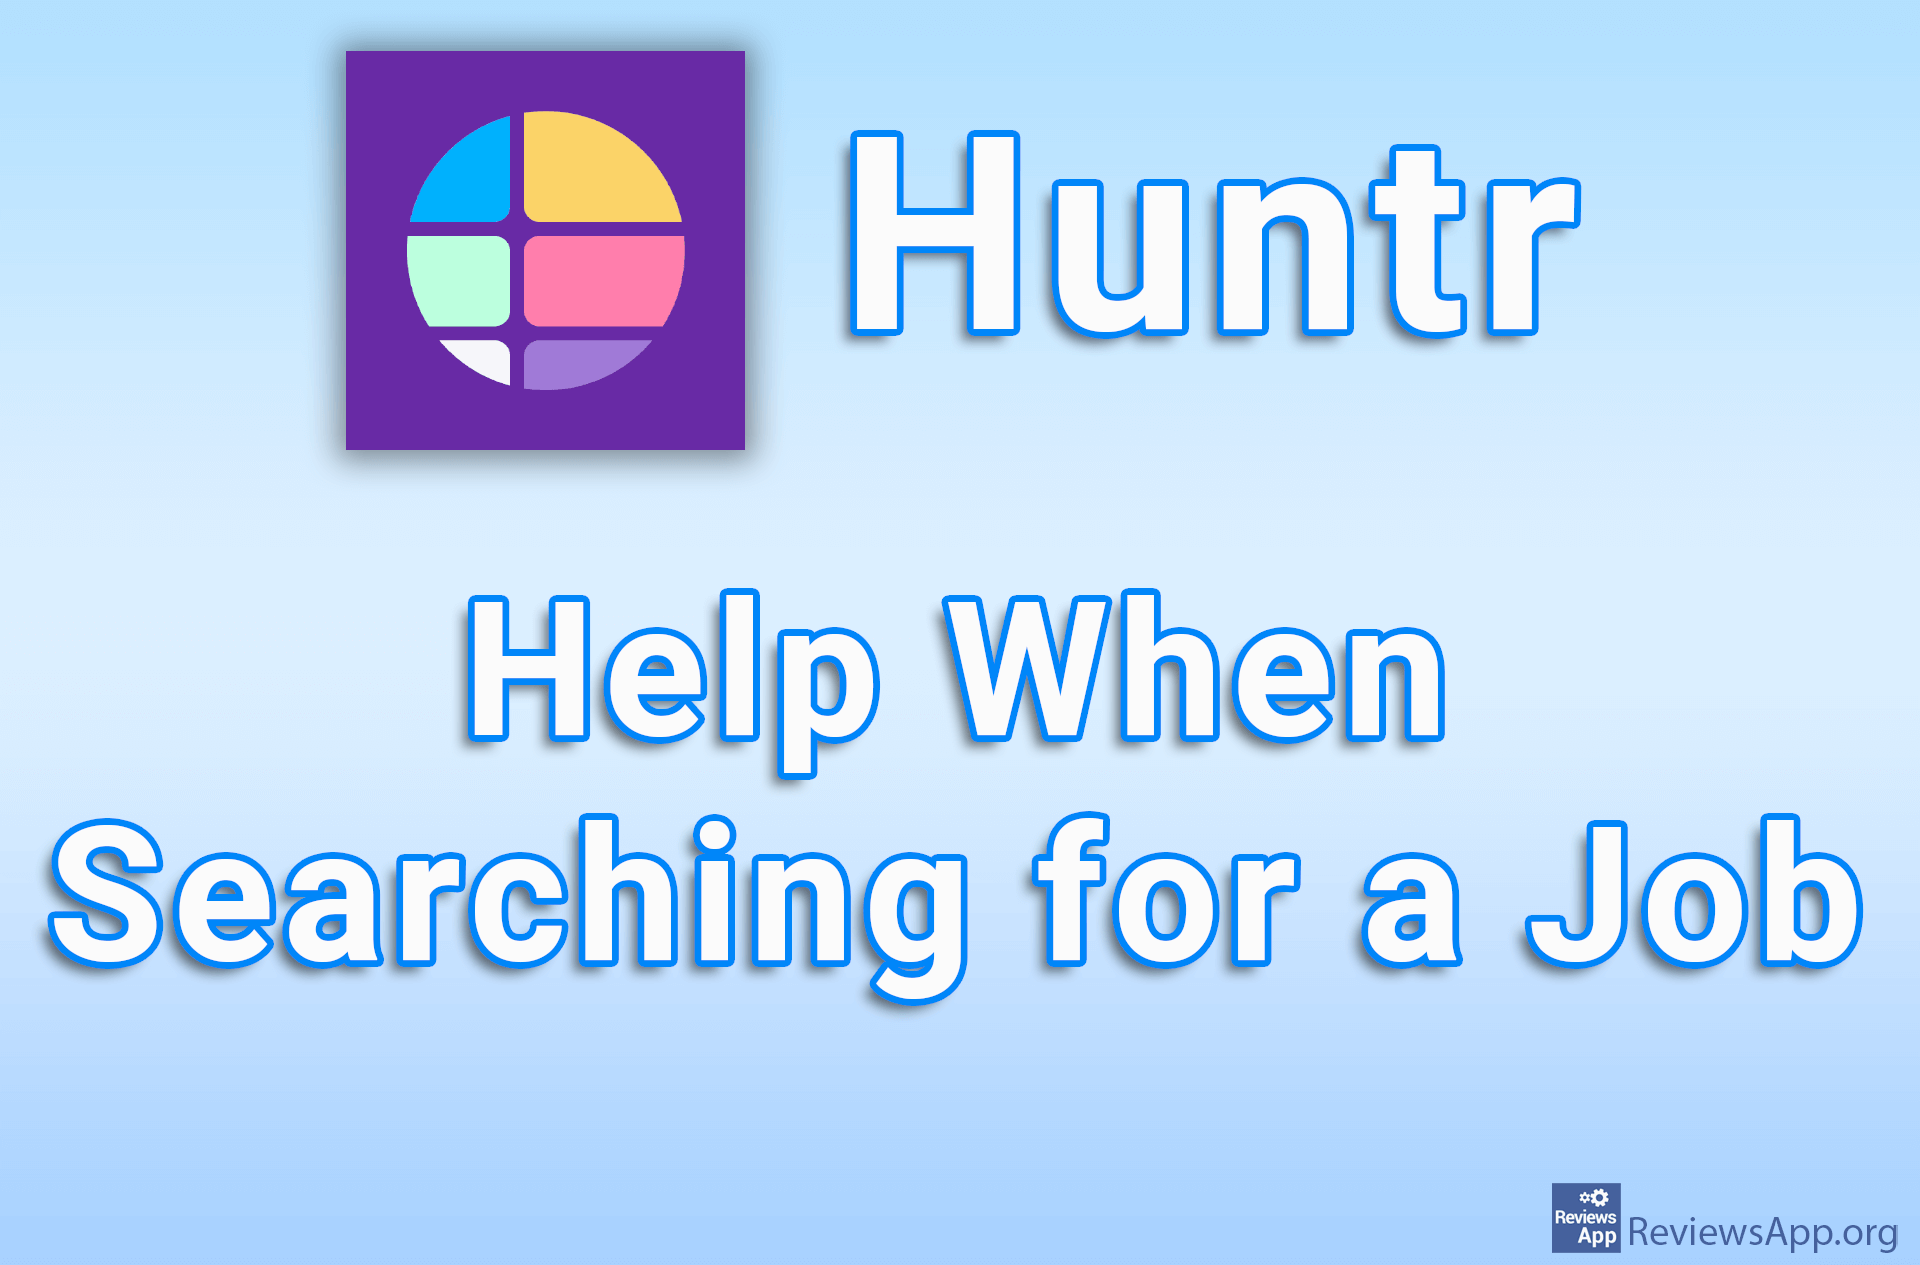 Huntr – Help When Searching for a Job